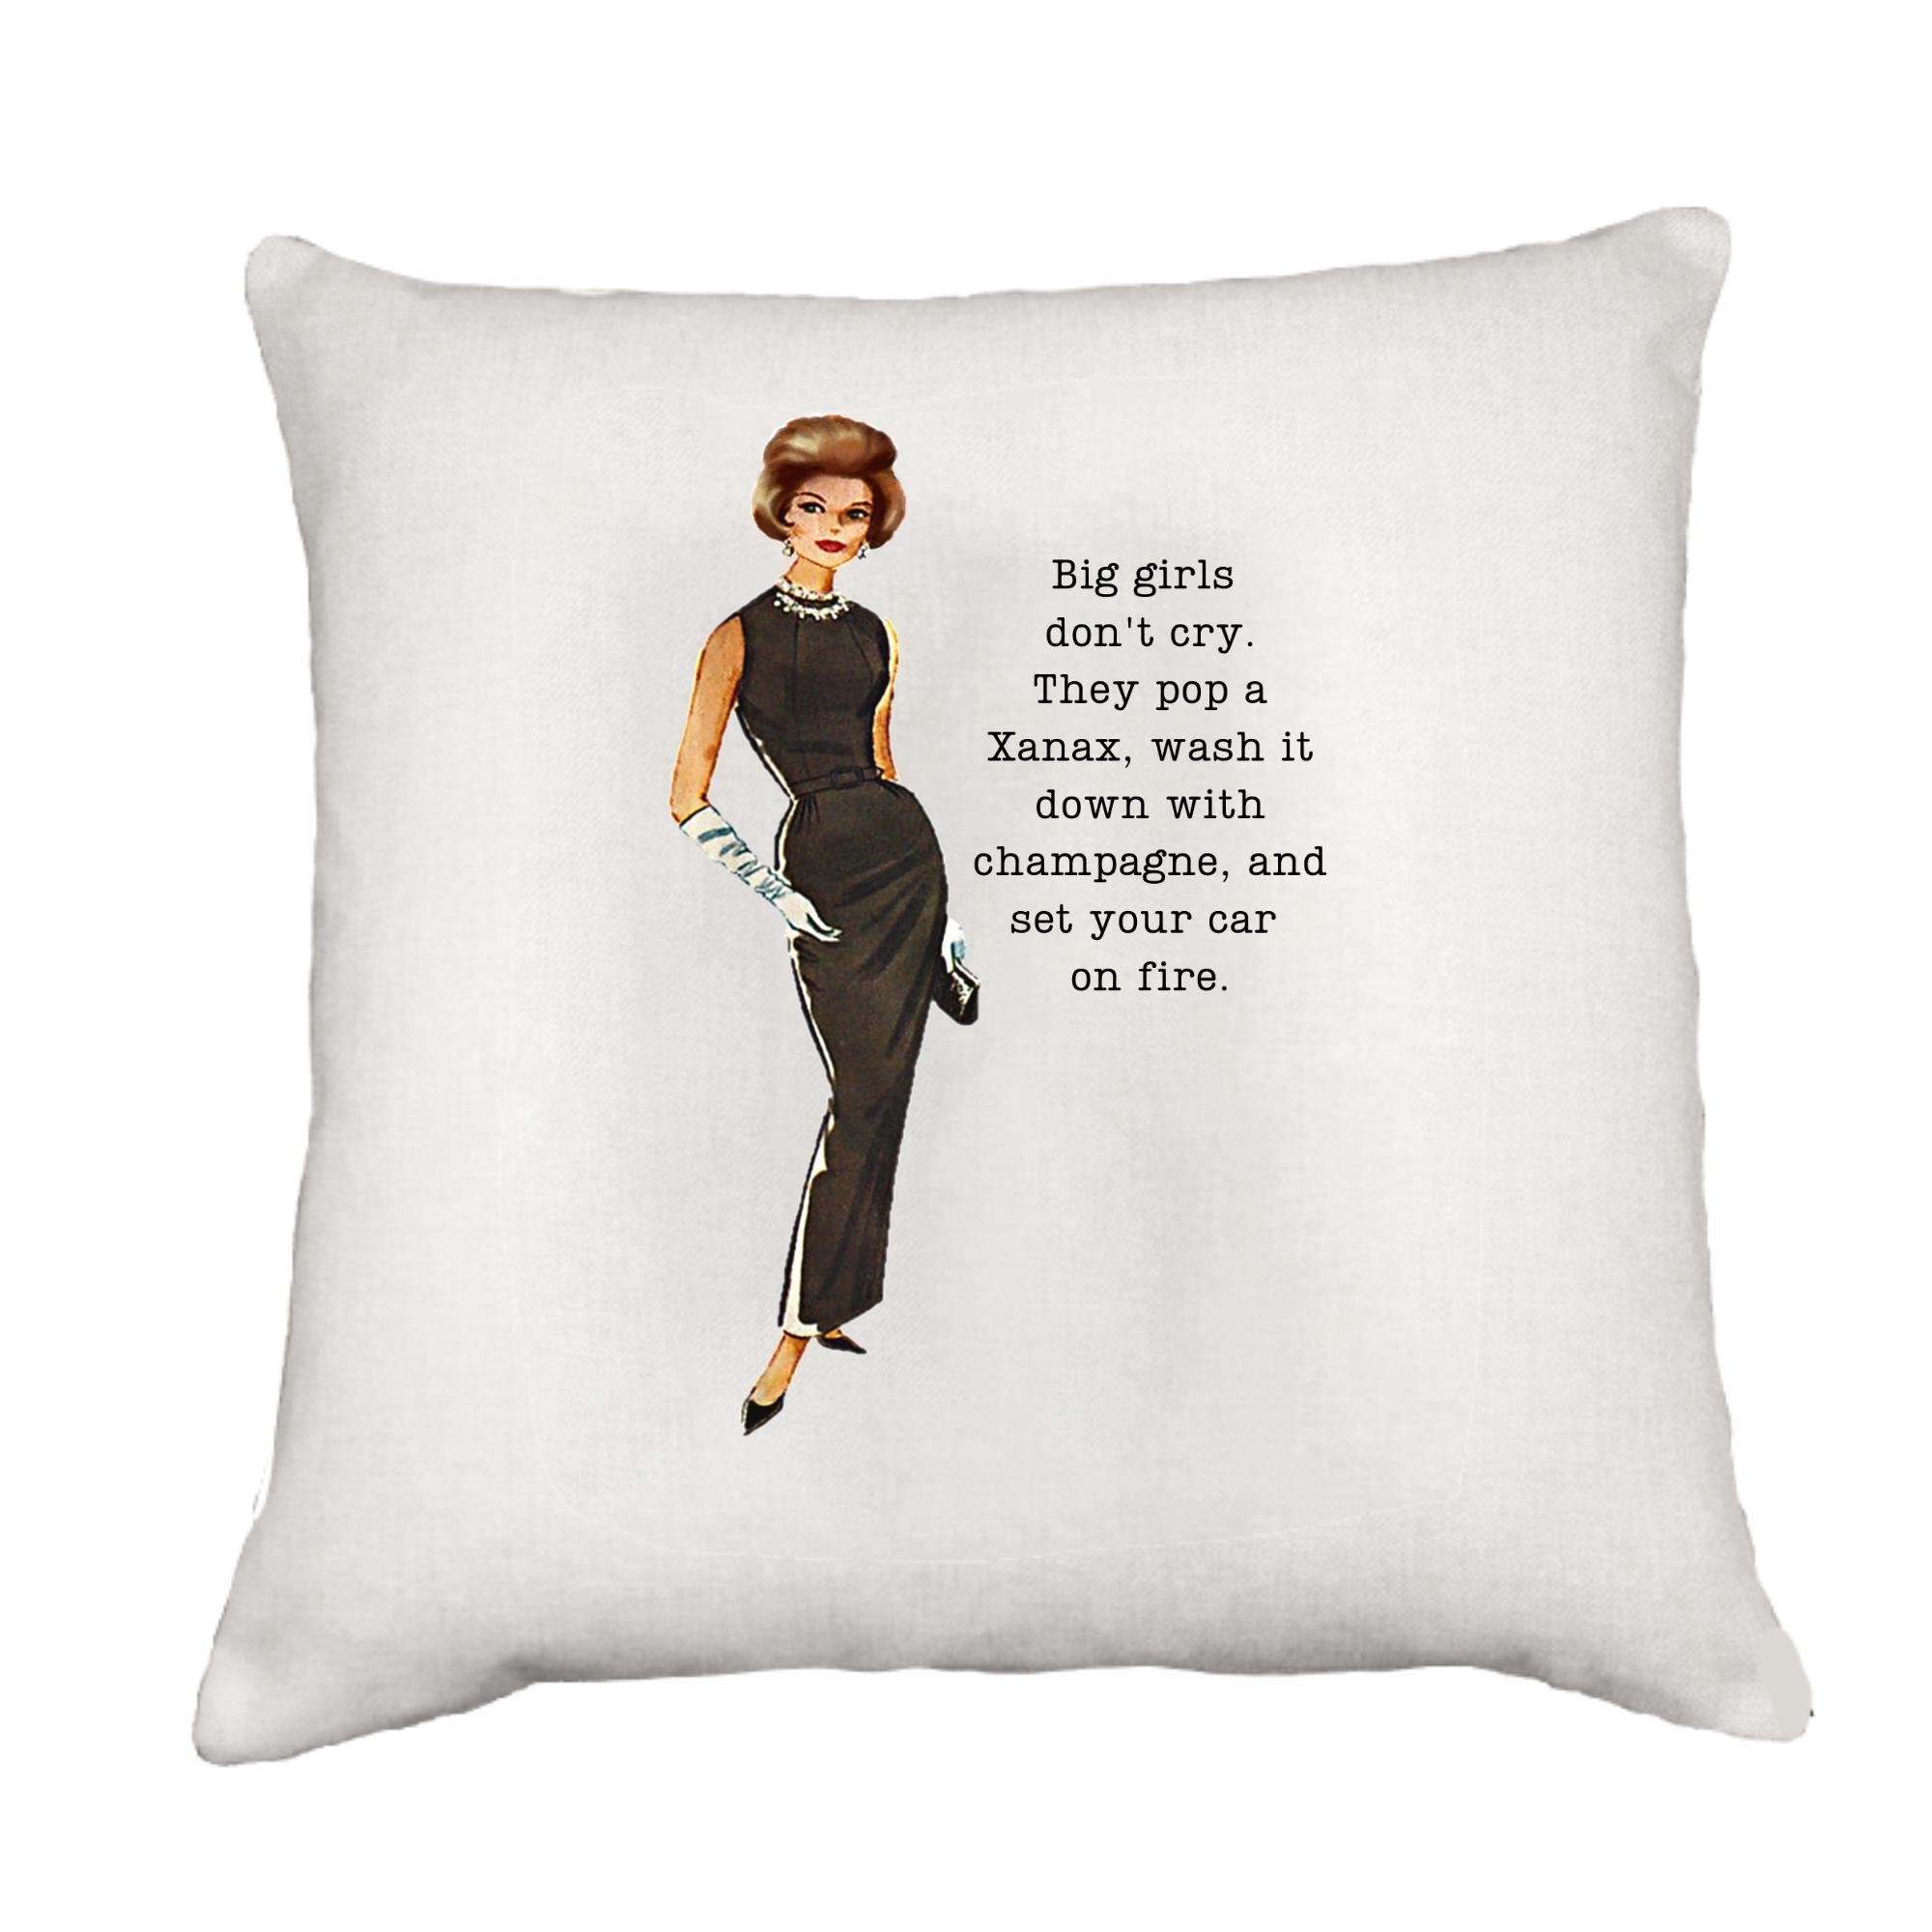 Big Girls Don't Cry Cottage Pillow Throw/Decorative Pillow - Southern Sisters